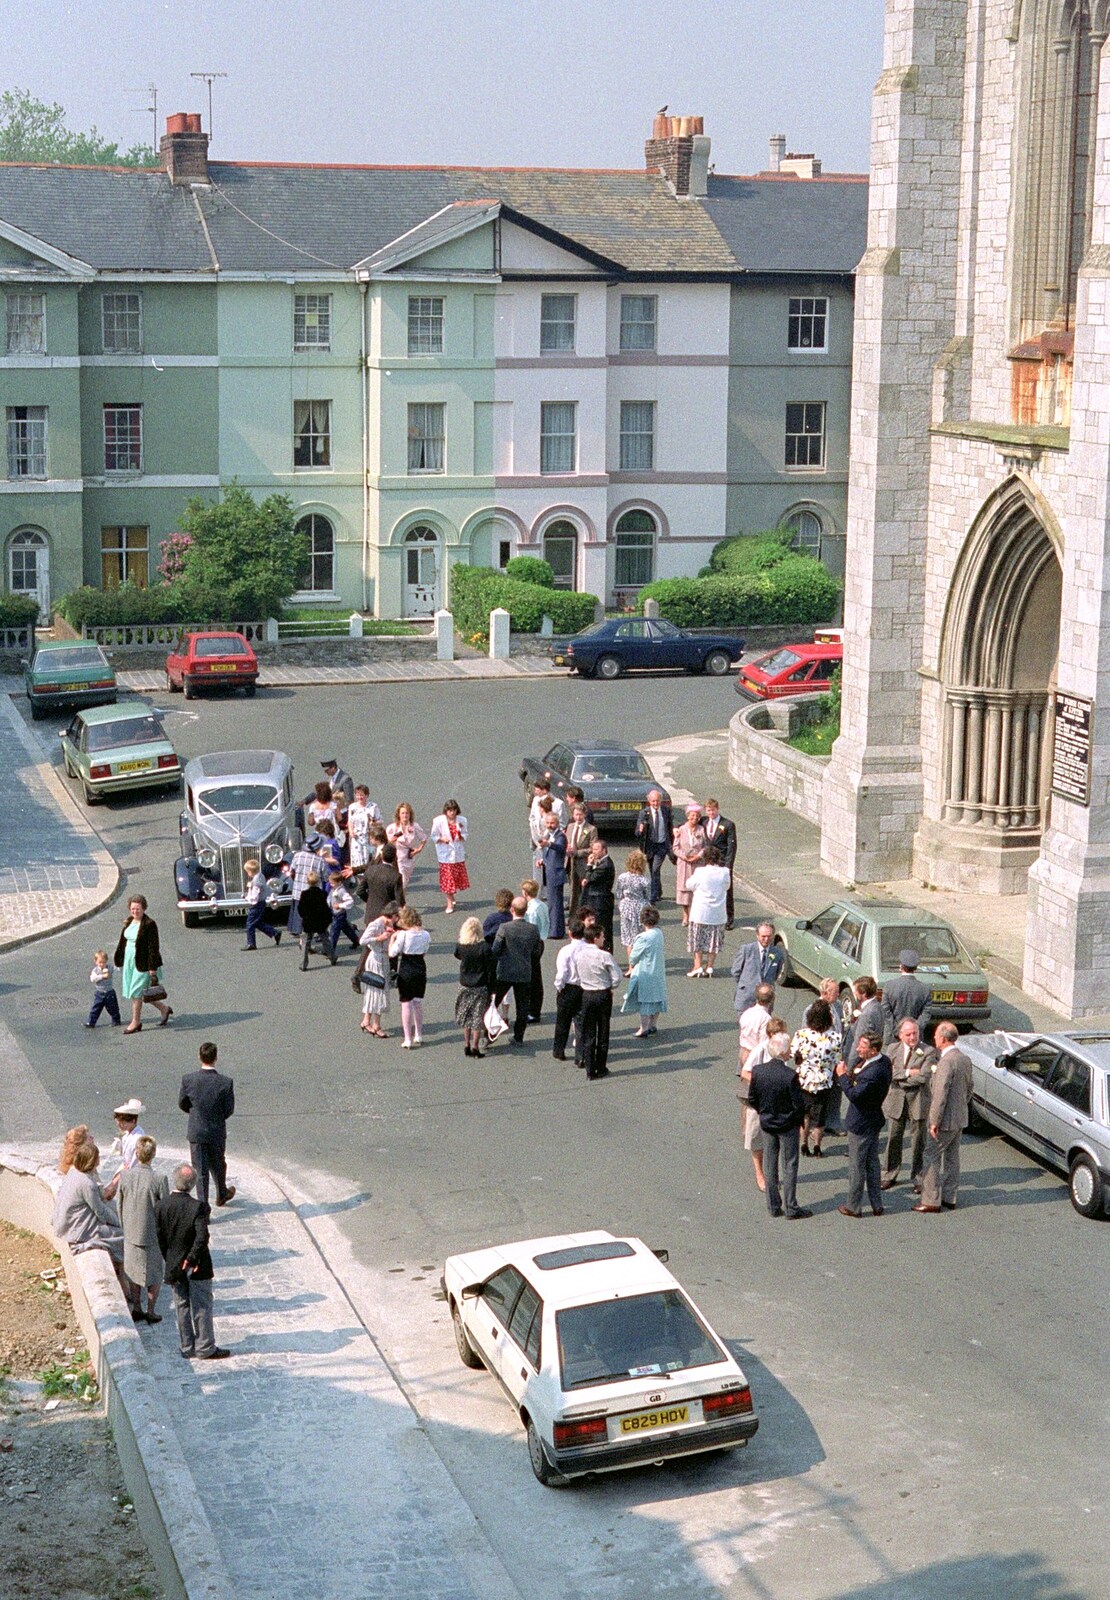 Uni: Risky Business, A Wedding Occurs and Dave Leaves, Wyndham Square, Plymouth - 15th July 1989: Wedding gusts mill around the entrance to Wyndham Square